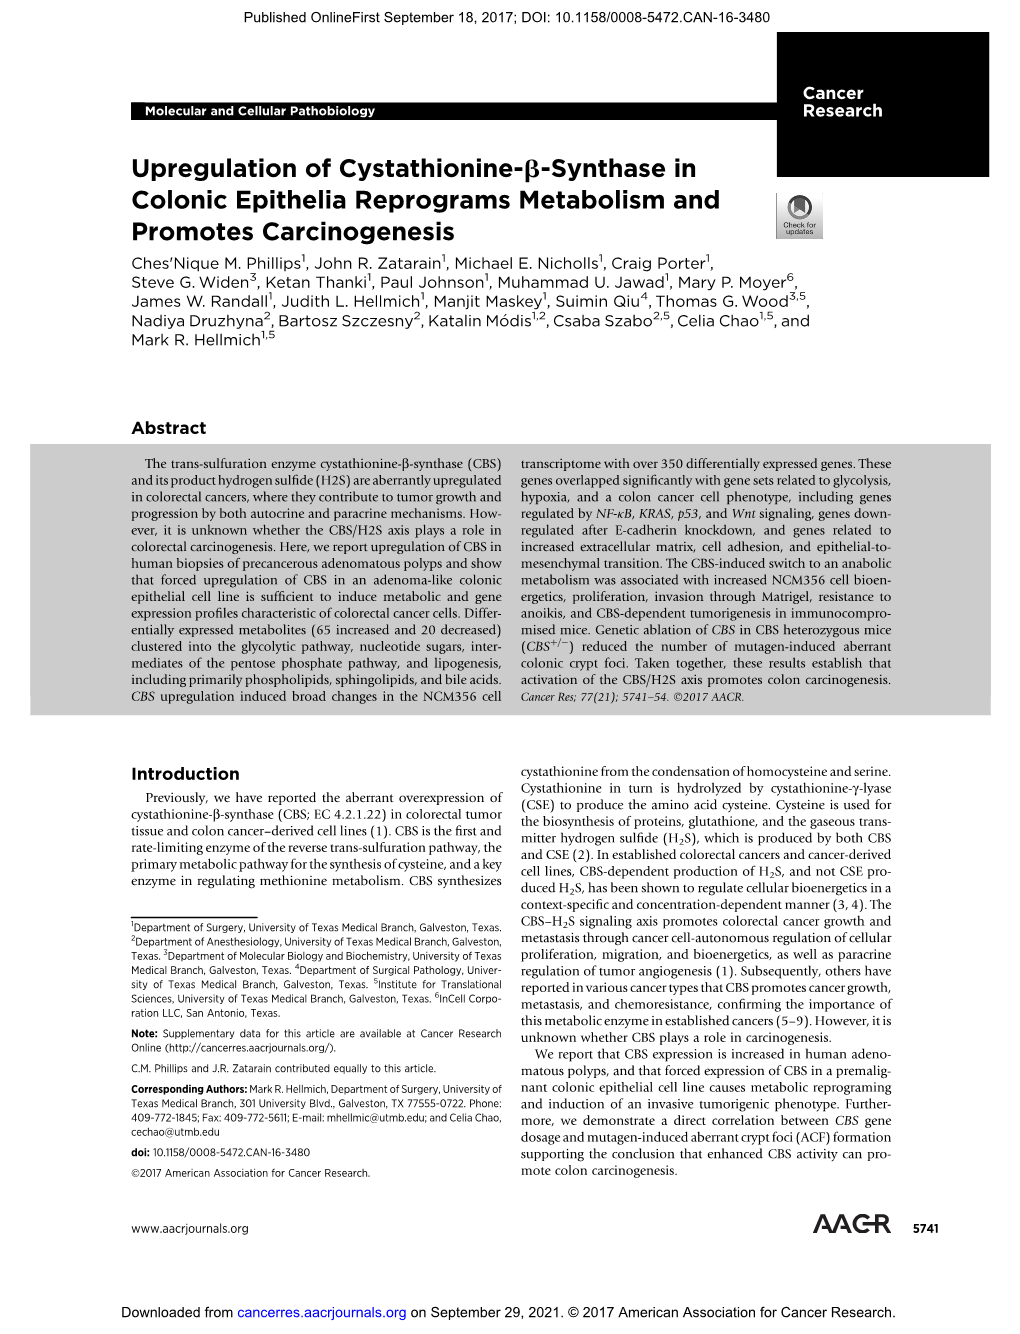 Upregulation of Cystathionine-B-Synthase in Colonic Epithelia Reprograms Metabolism and Promotes Carcinogenesis Ches'nique M